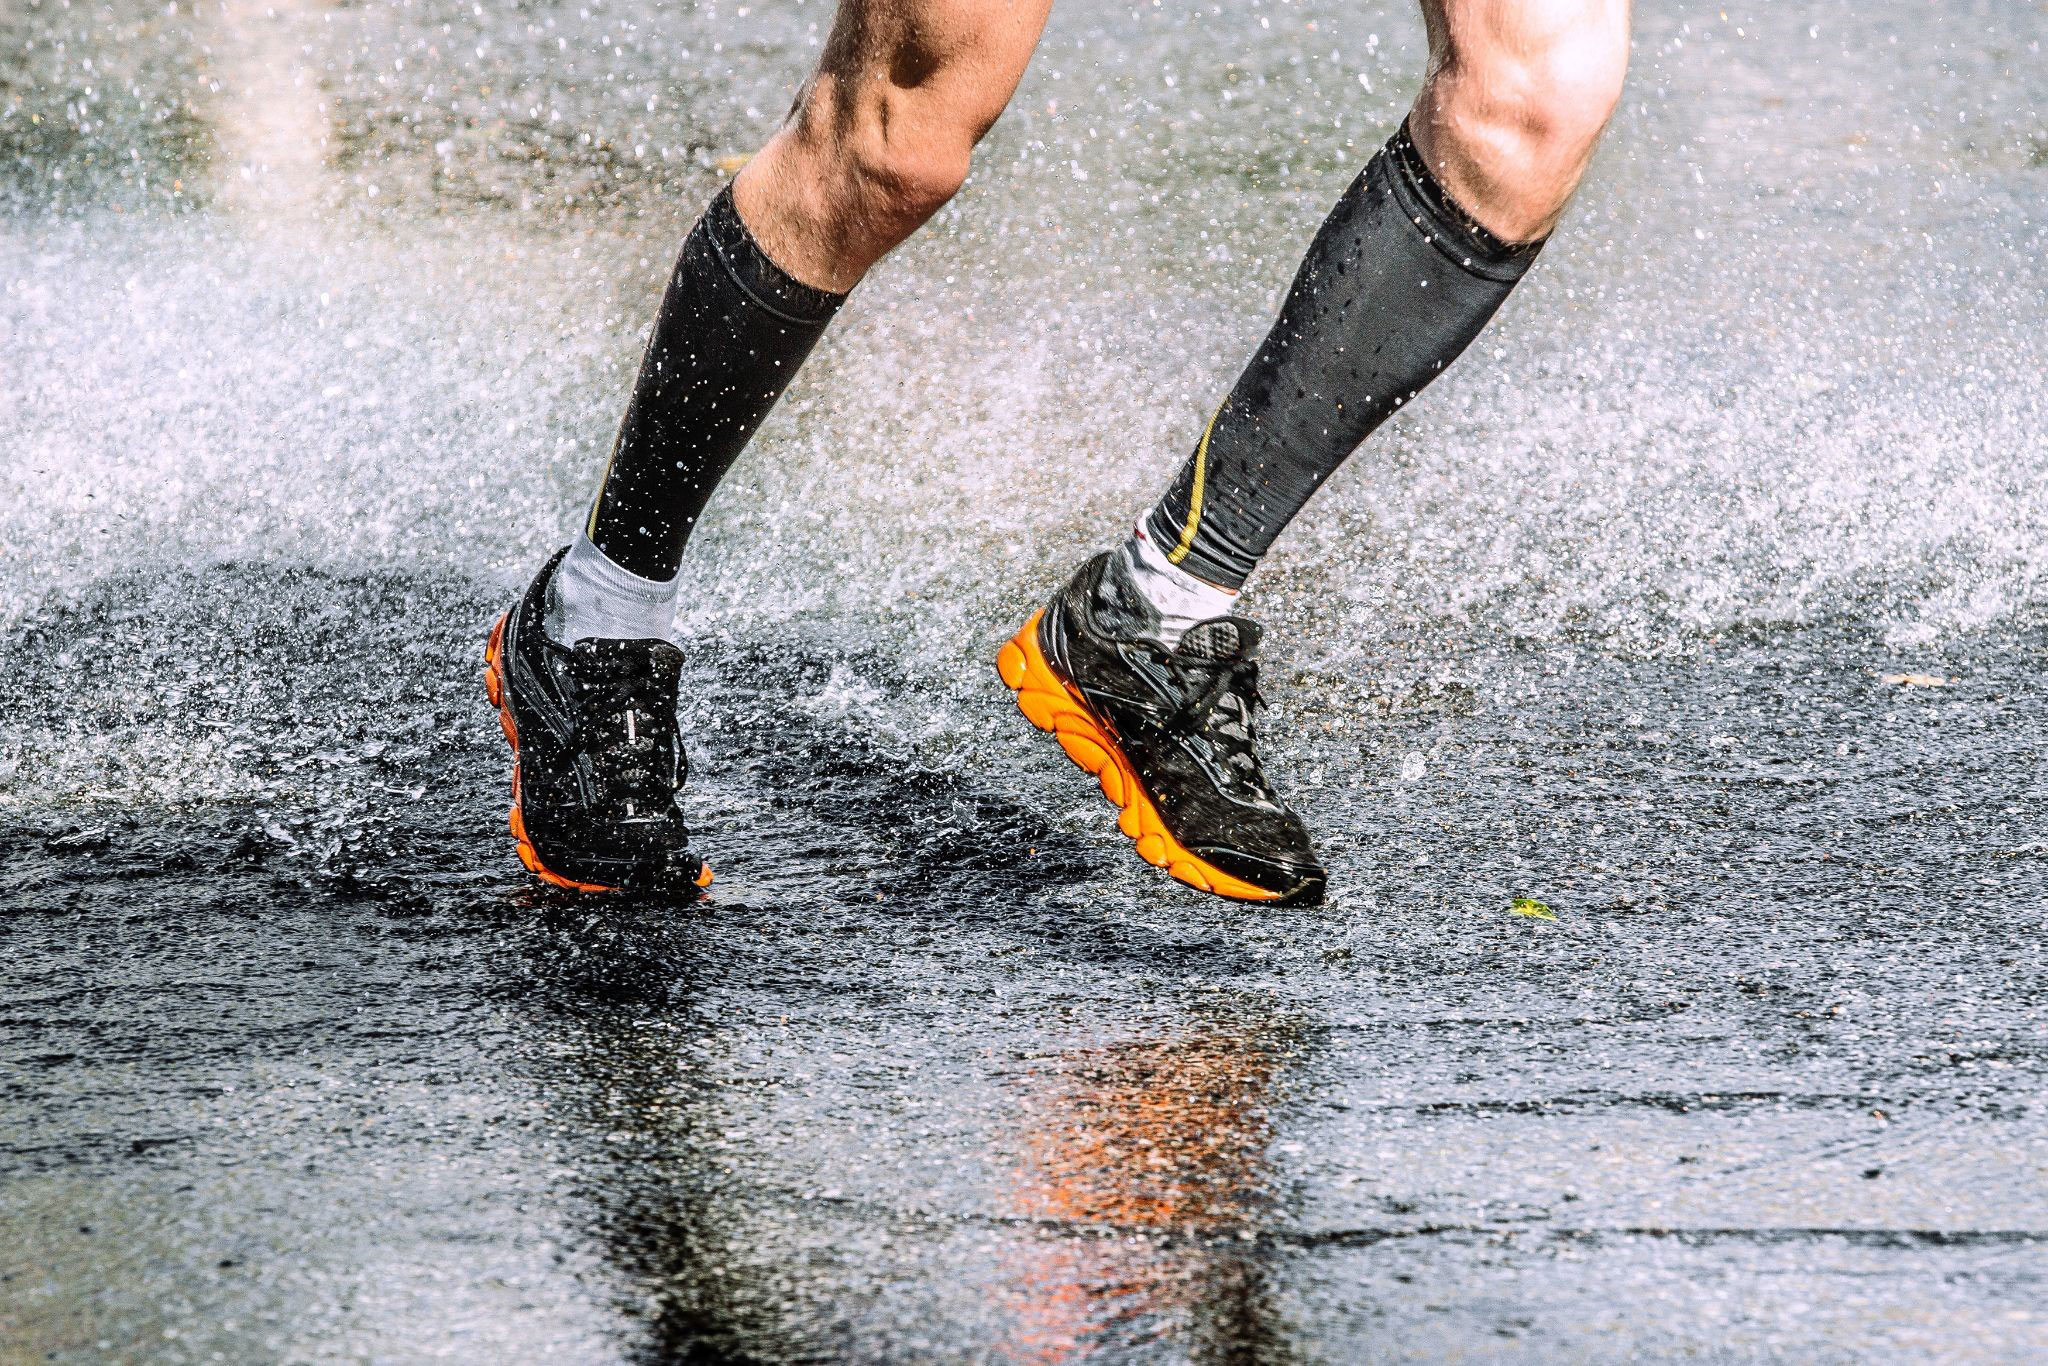 Painful legs at rest? Compression socks for work and other vein health